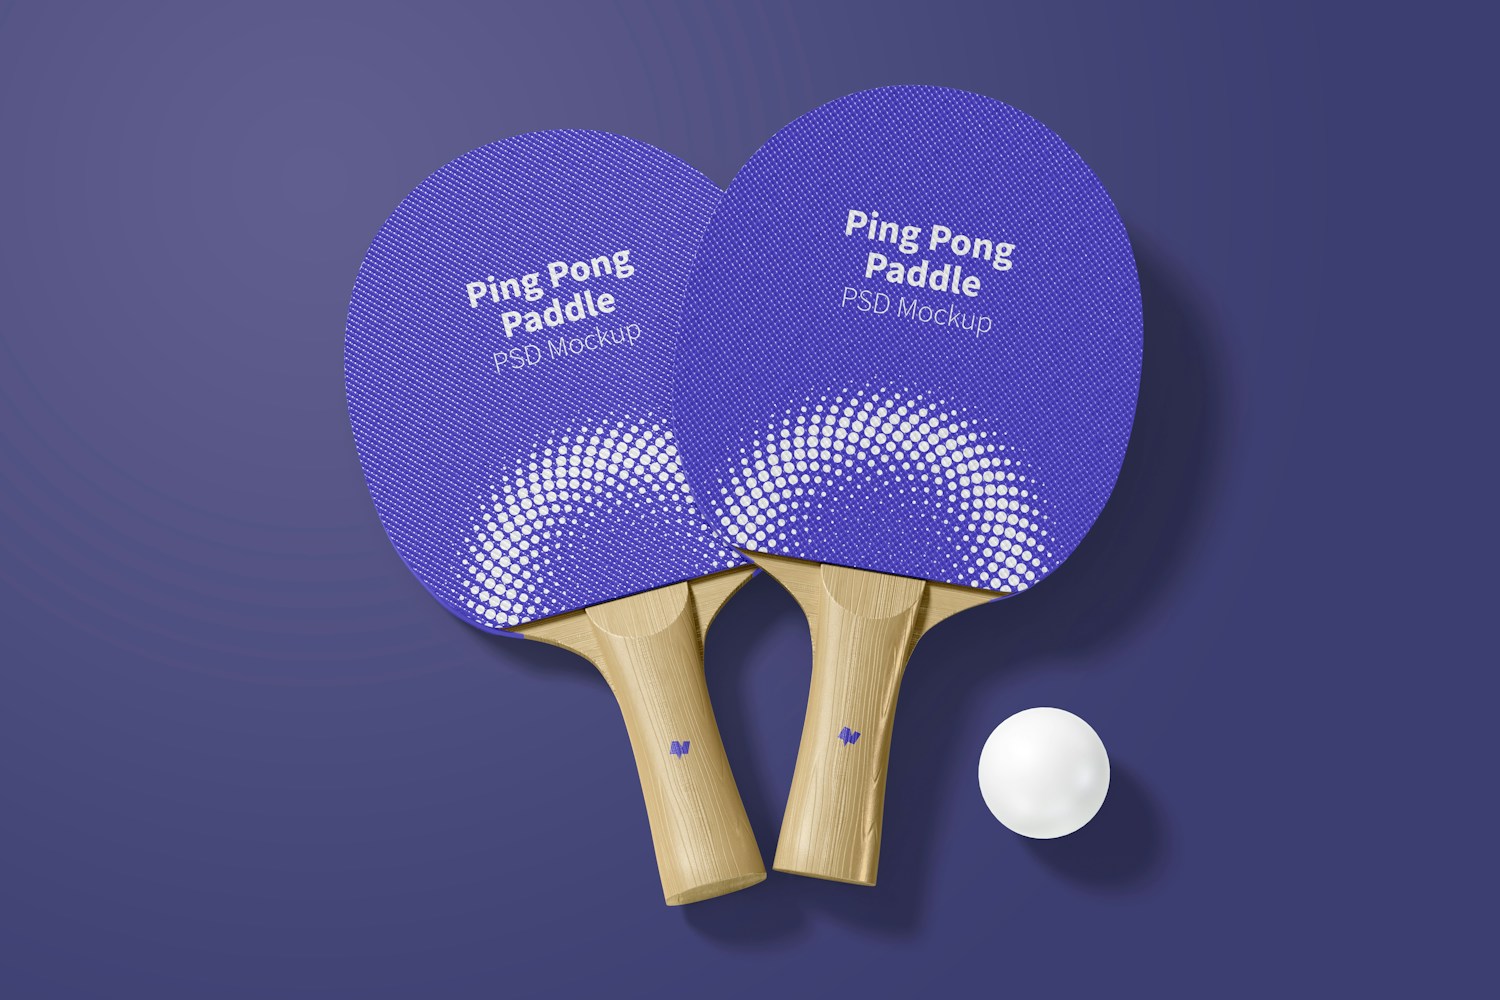 You can customize these paddles however you want.